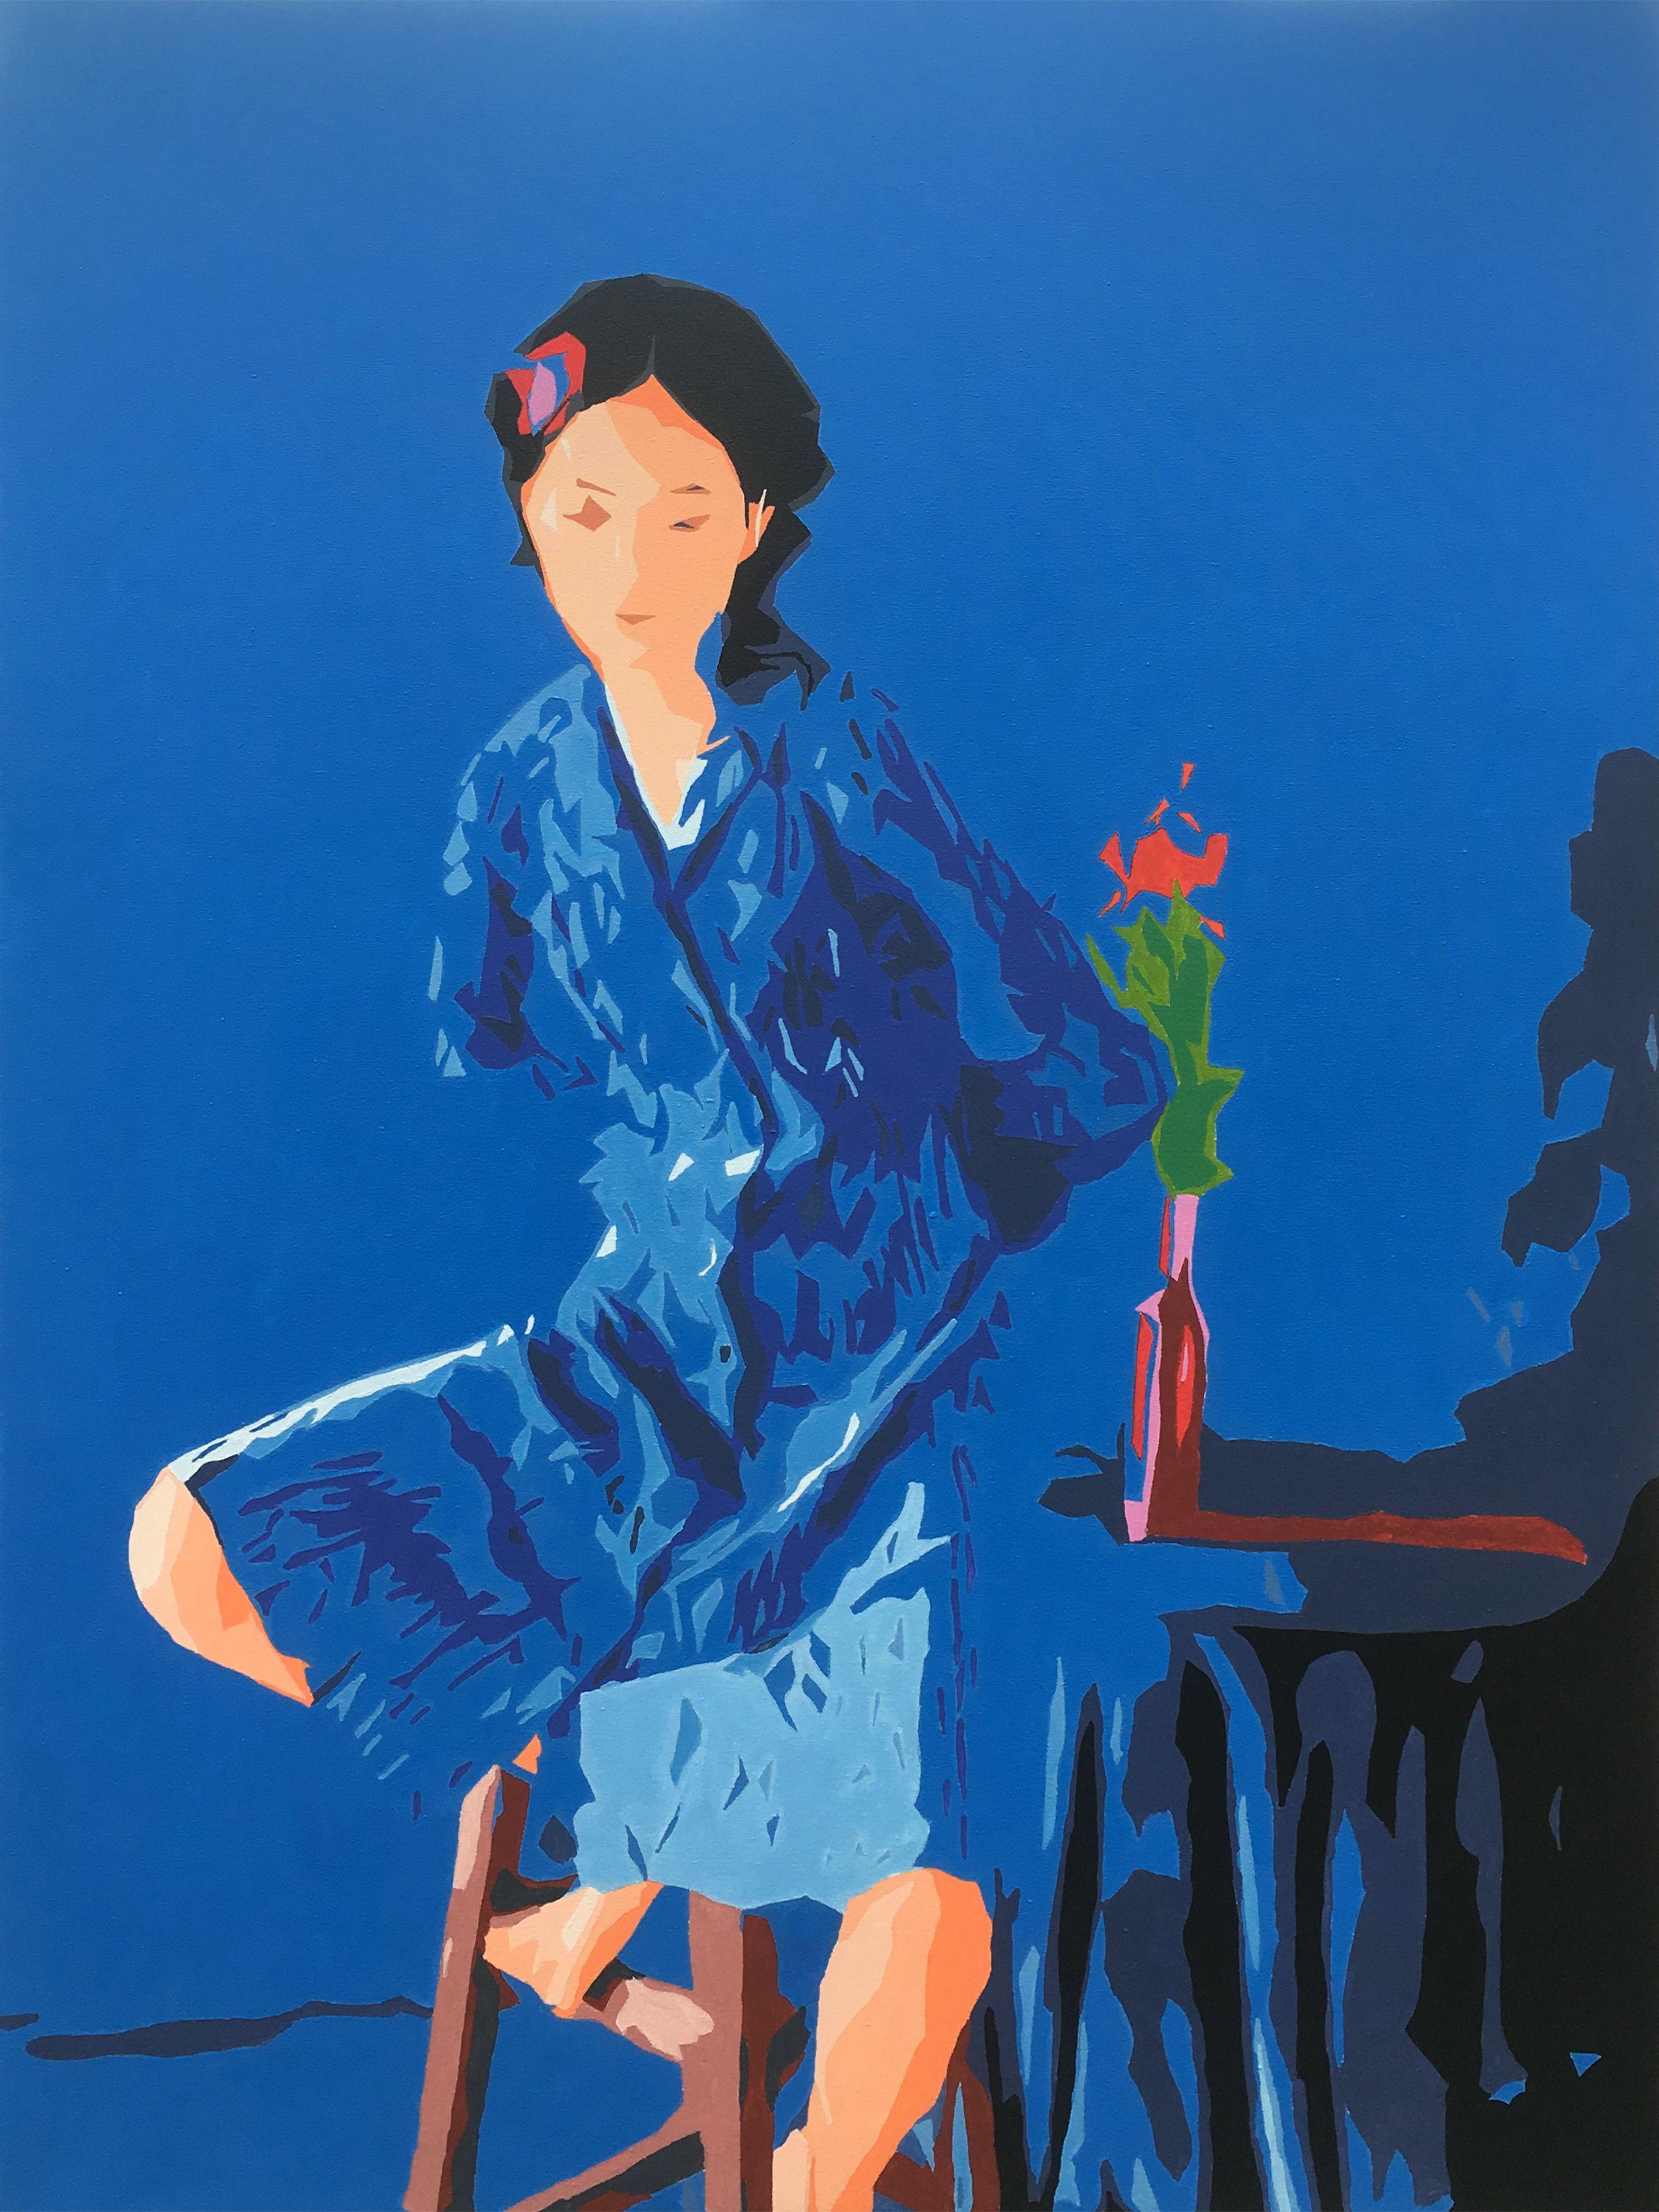 The original figurative painting "Portrait in Blue" was created with colourful acrylic paints on a standard canvas. Ideal for your home, living room, dining room, bedroom or office.    The size of this particular artwork:    Height : 23.62 inches